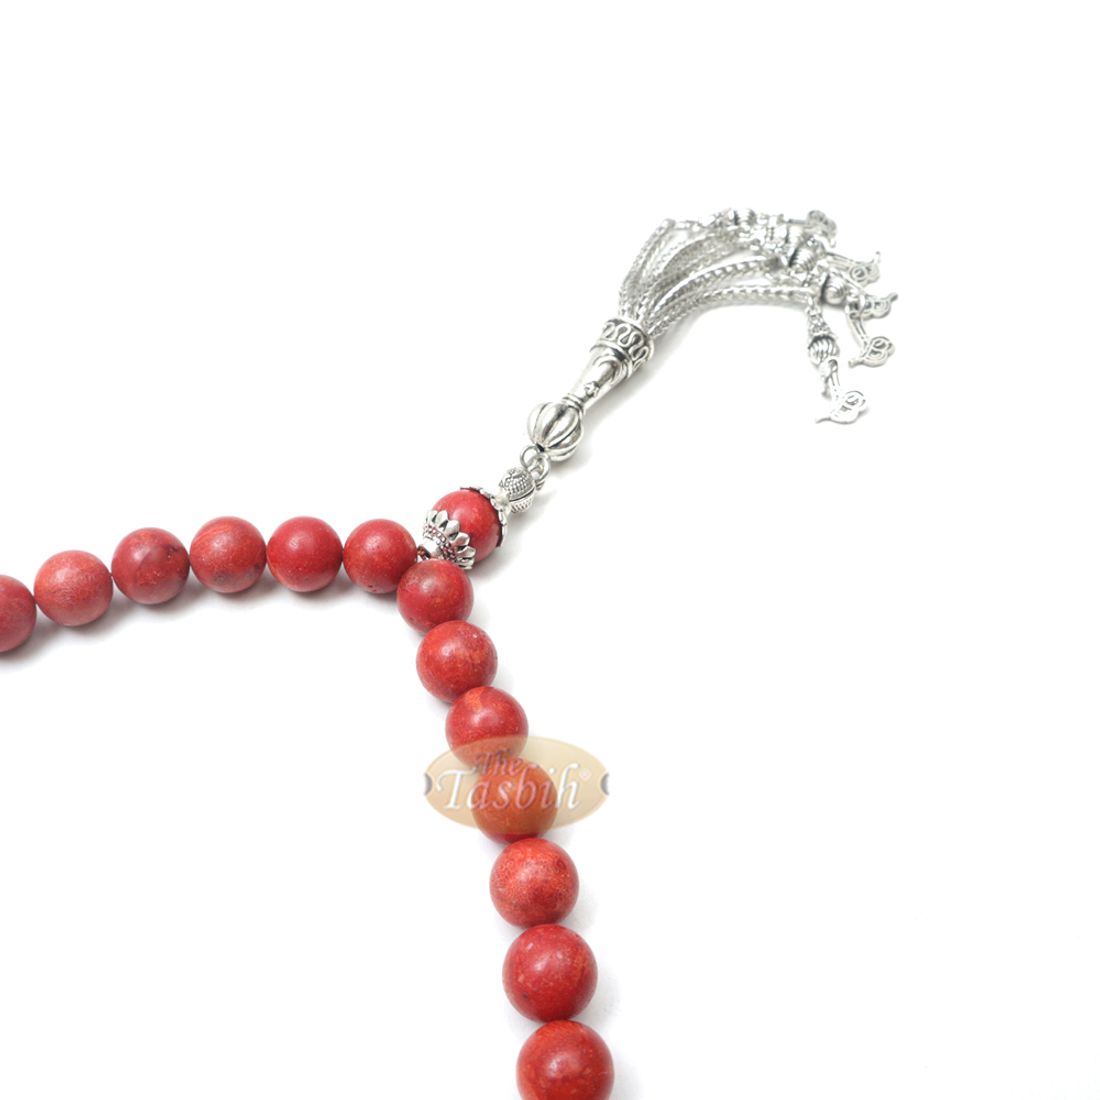 10-mm Red Sea Coral 33-Bead Prayer Beads with Ornamental Turkish Tughra 5-chain Tassel Charms